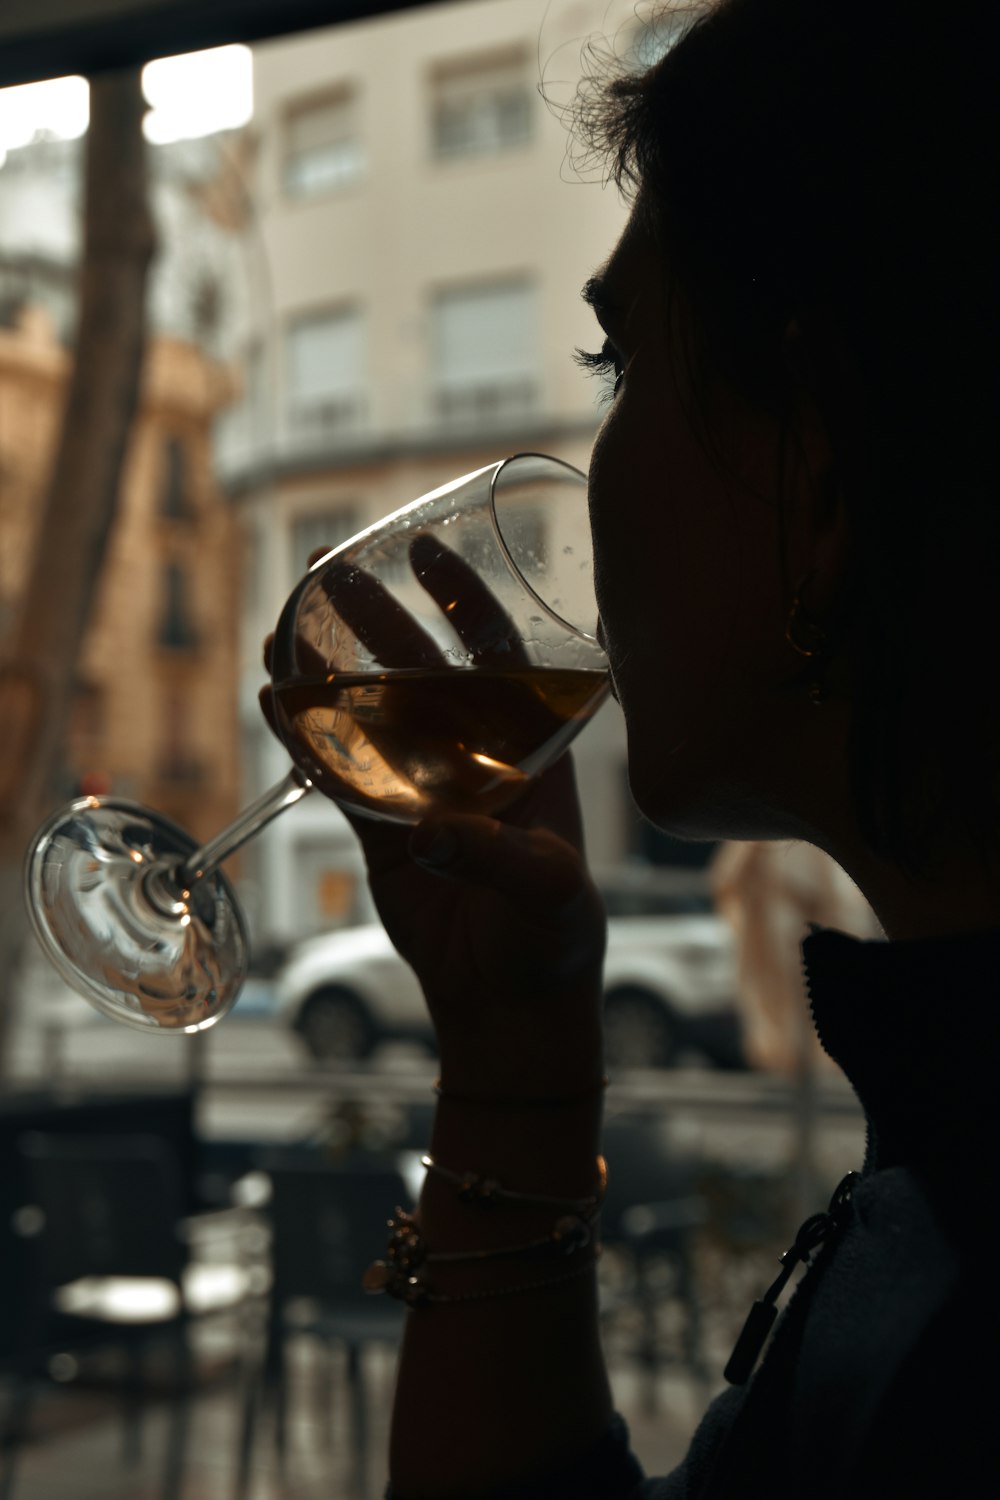 a woman drinking a glass of wine in front of a window